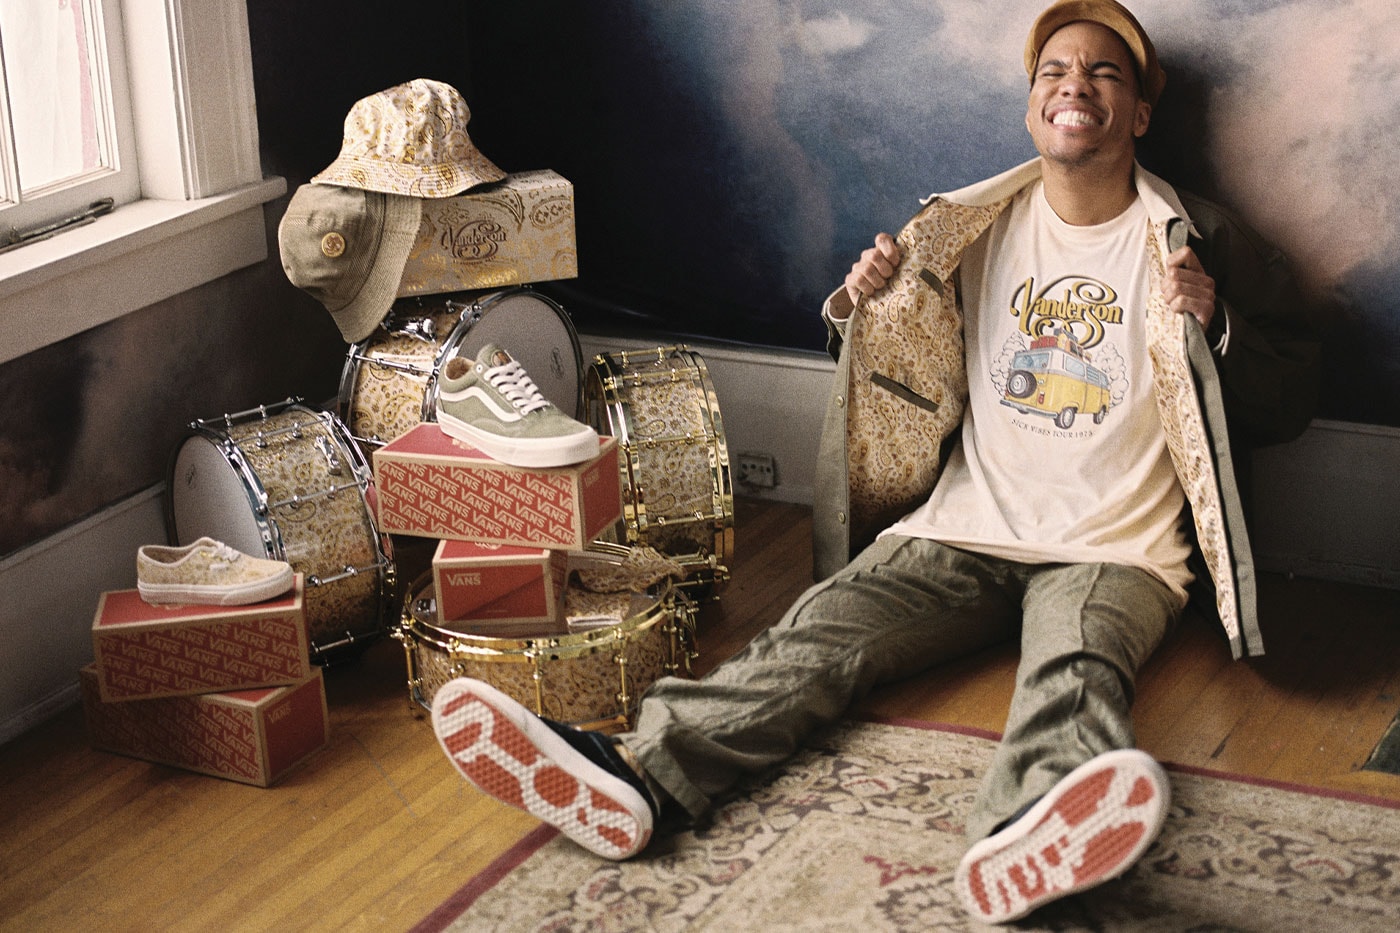 anderson paak vans old skool 36 authentic apparel release date info store list buying guide photos price